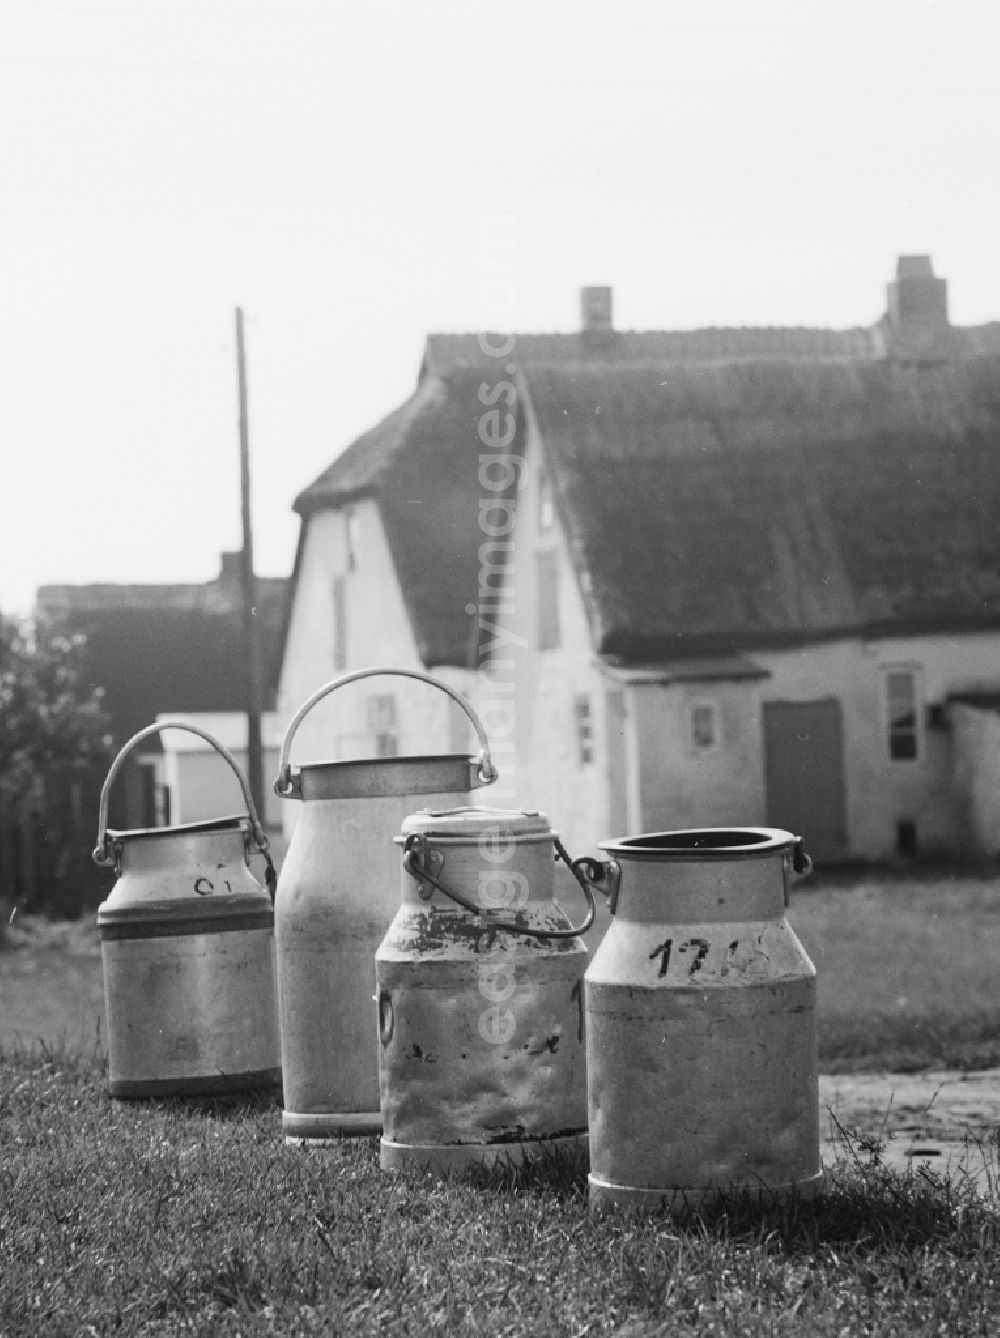 Insel Hiddensee: Collection point for milk jugs from zinc sheet in Neuendorf on the island Hiddensee in what is now the state of Mecklenburg-Western Pomerania